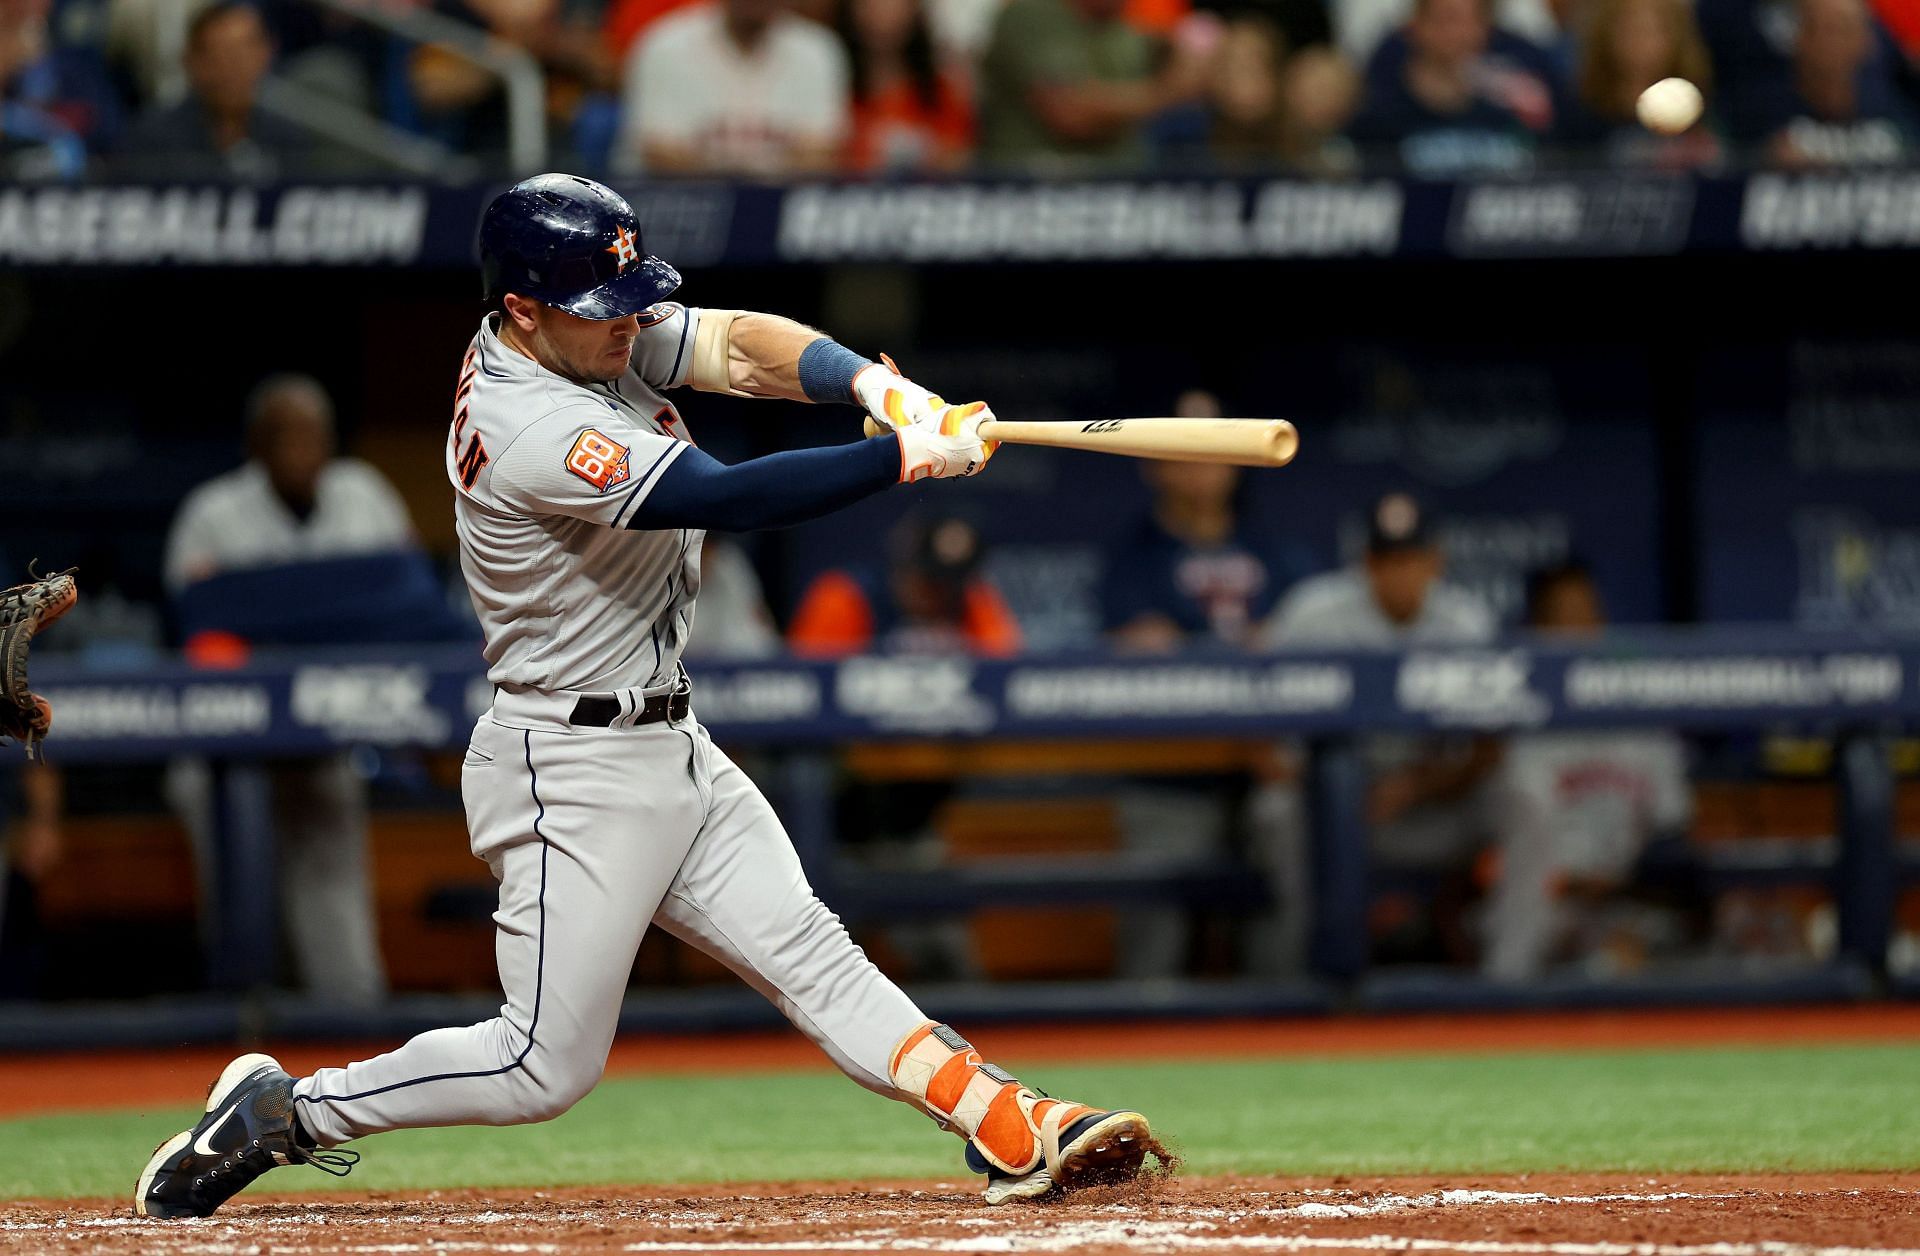 Alex Bregman of the Houston Astros during a game against the Tampa Bay Rays.